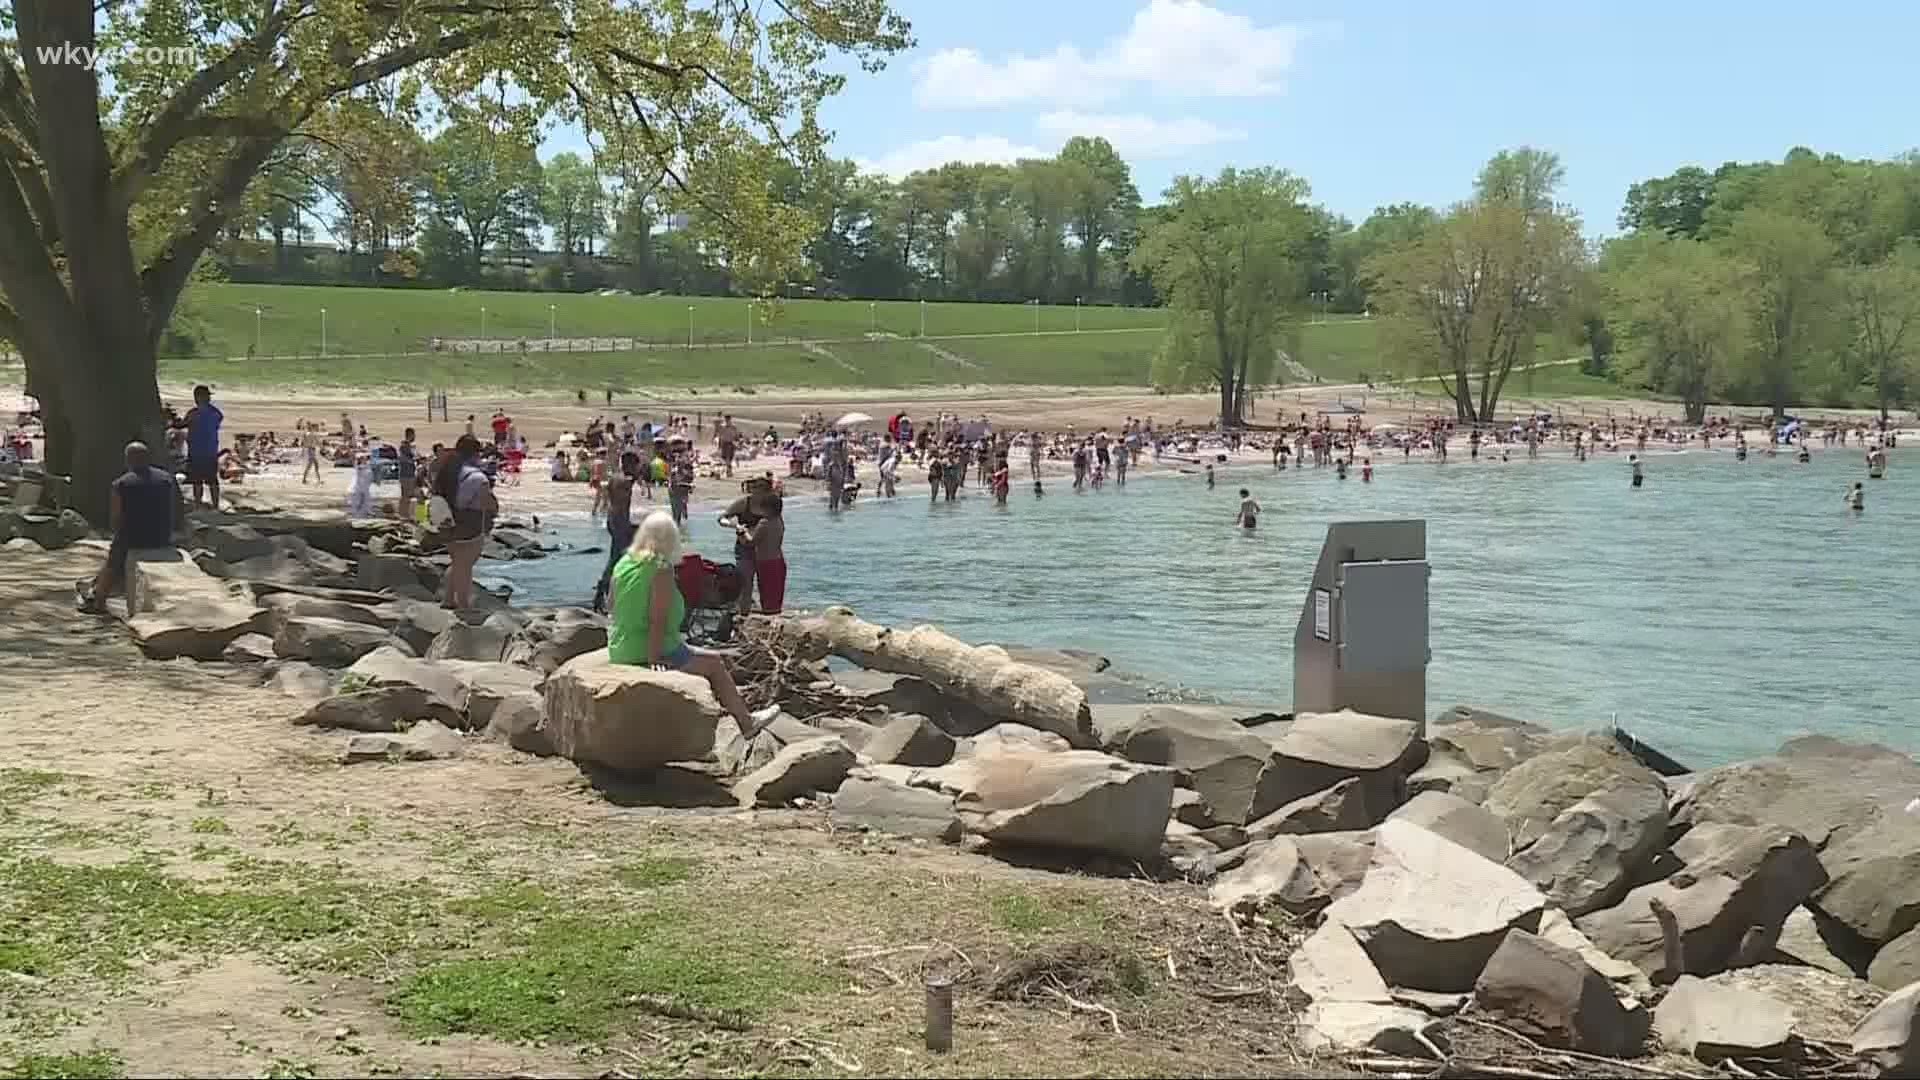 Parks in Northeast Ohio drew Memorial Day crowds with various degrees of physical distancing.